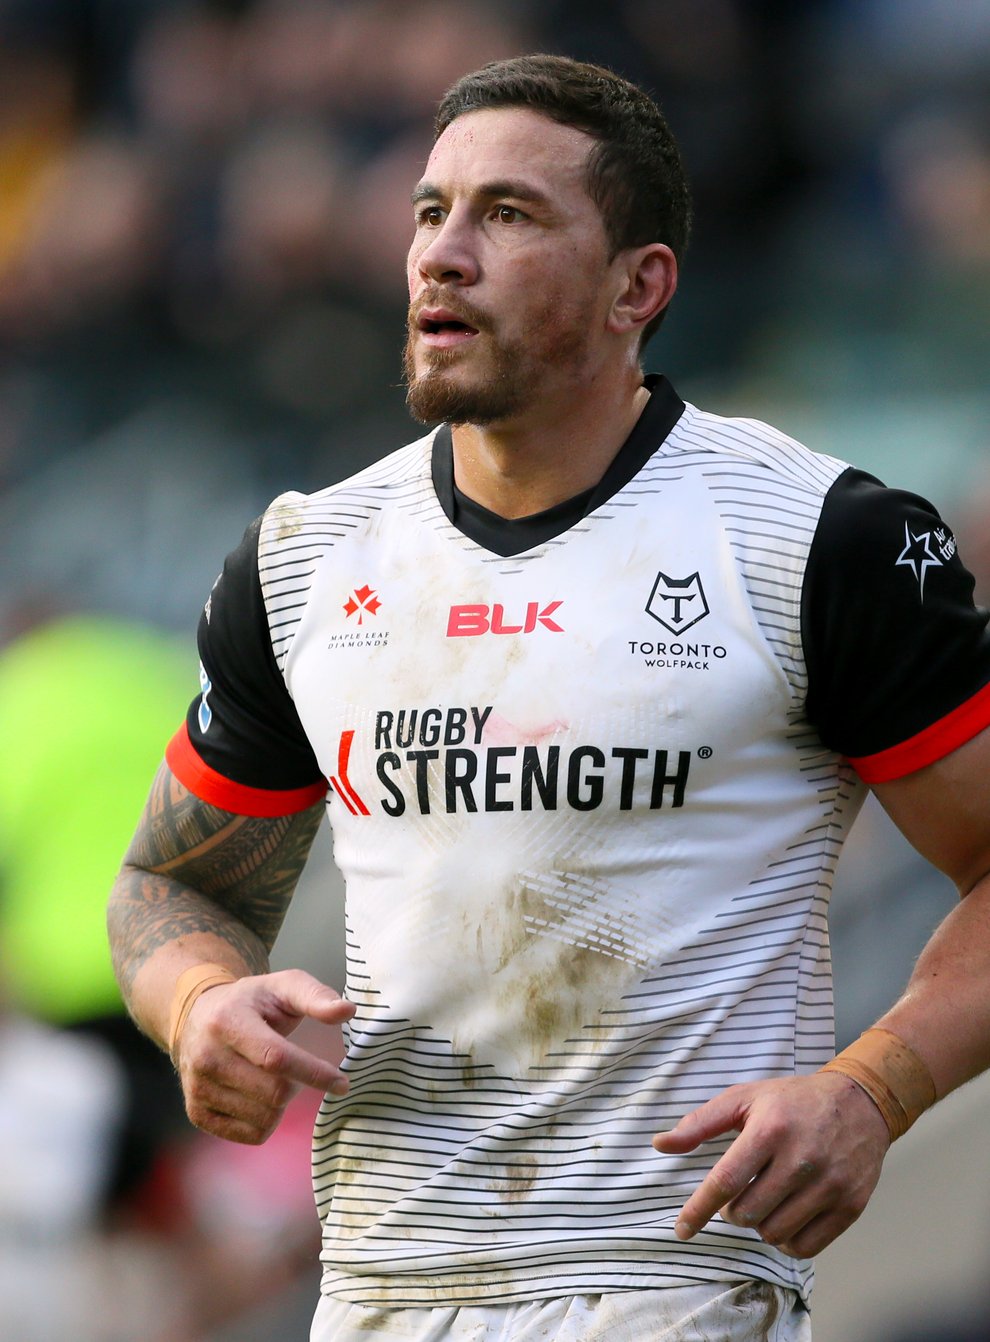 Toronto Wolfpack, whose star player Sonny Bill Williams is pictured, have withdrawn from Super 2020 prompting the RFL to announce the scrapping of relegation for this campaign.